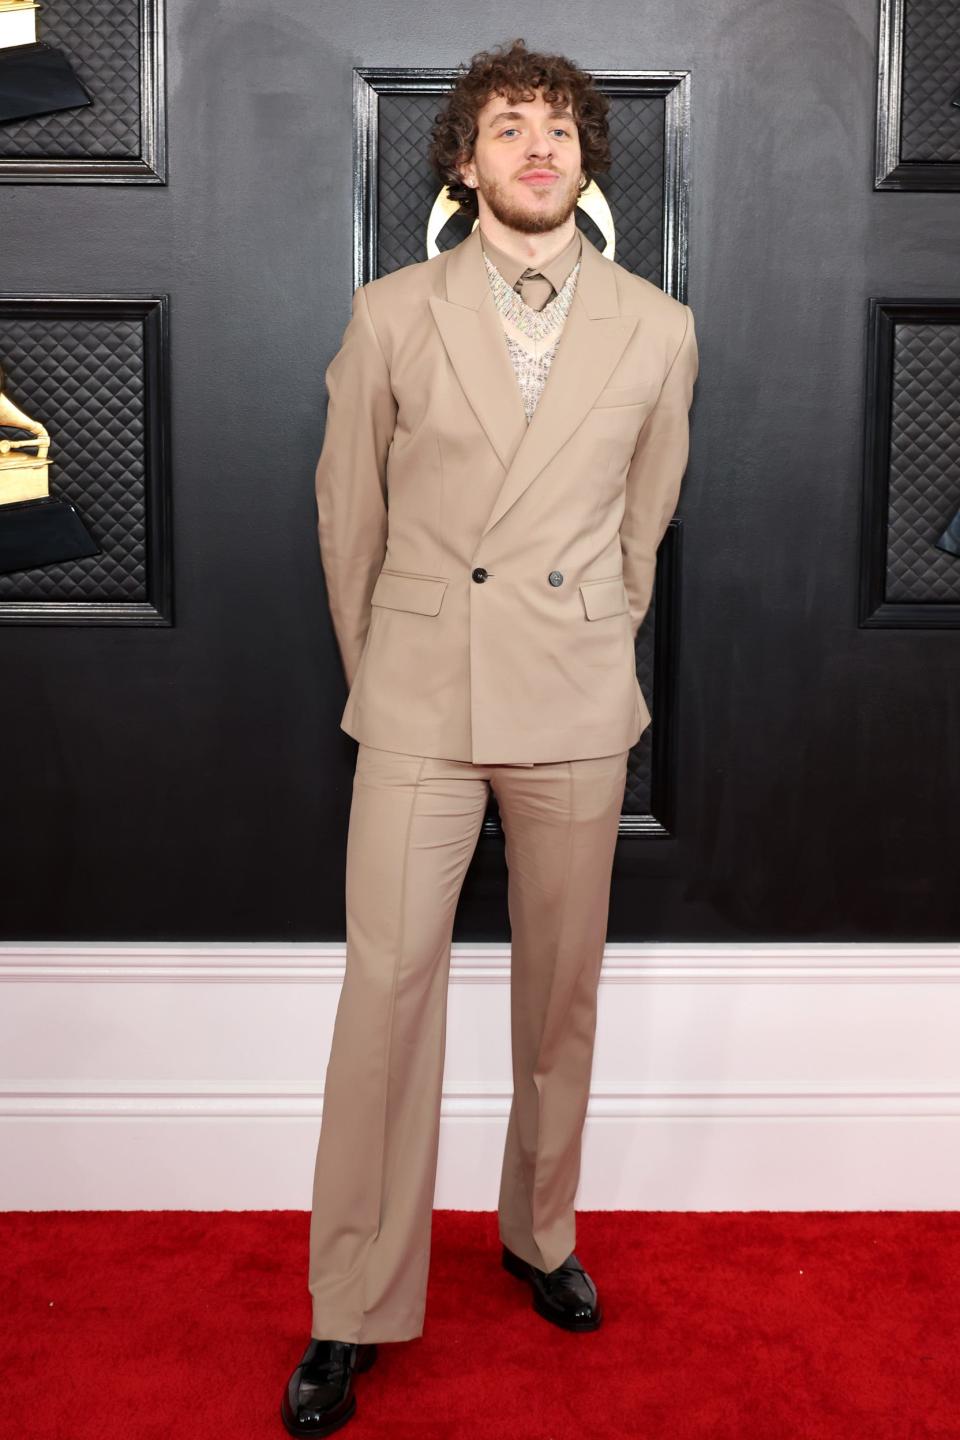 Jack Harlow attends the 2023 Grammy Awards